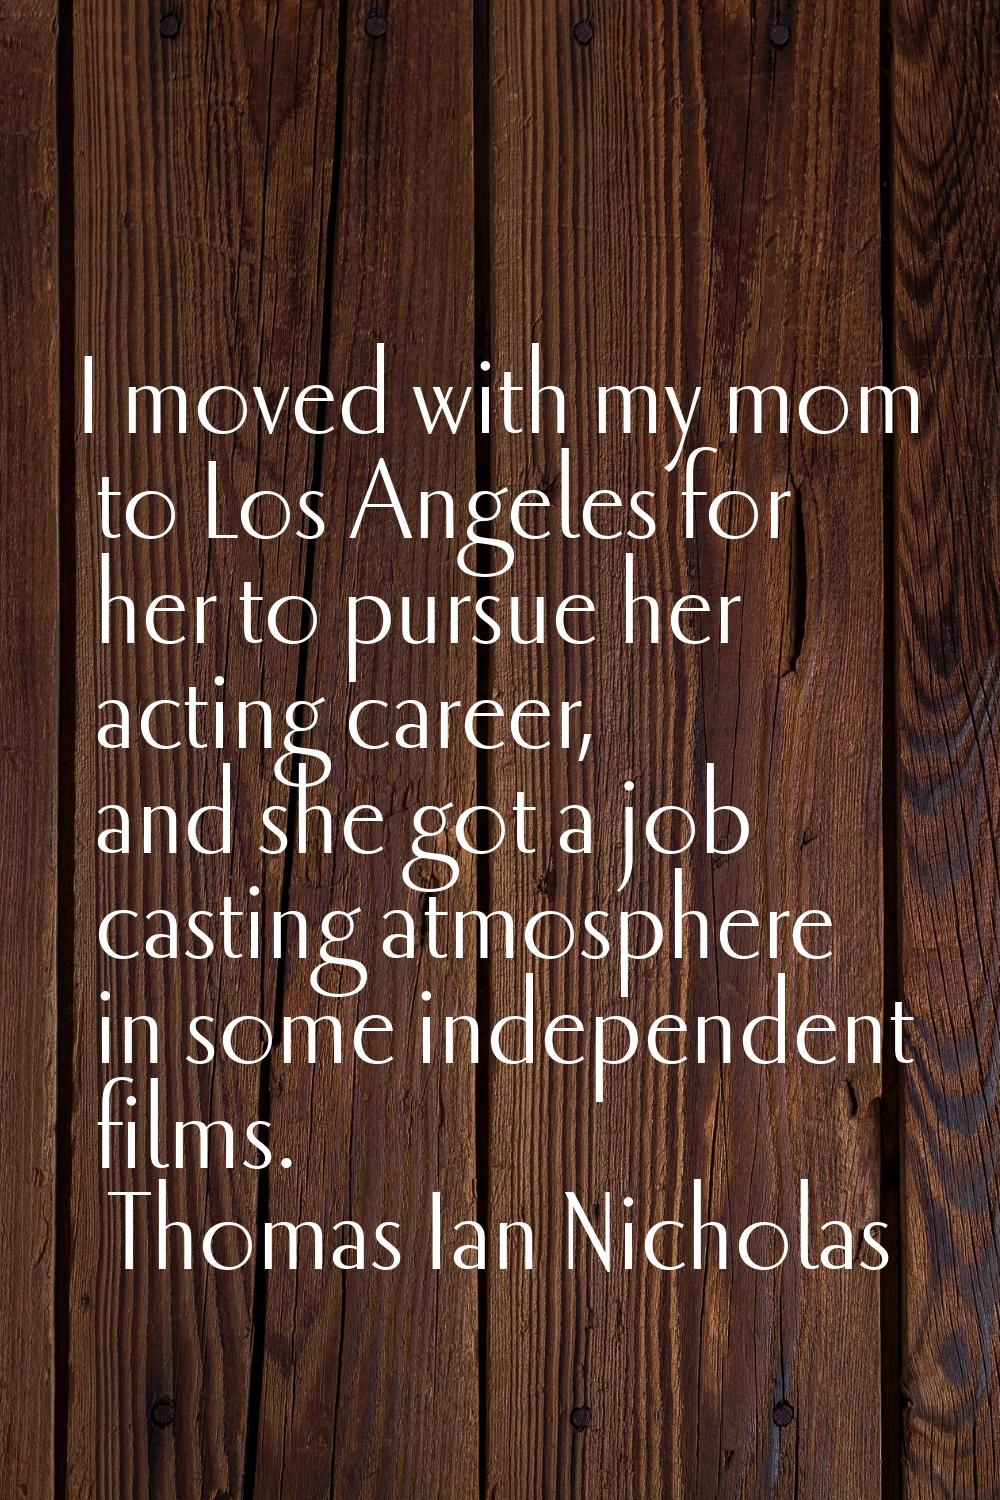 I moved with my mom to Los Angeles for her to pursue her acting career, and she got a job casting a